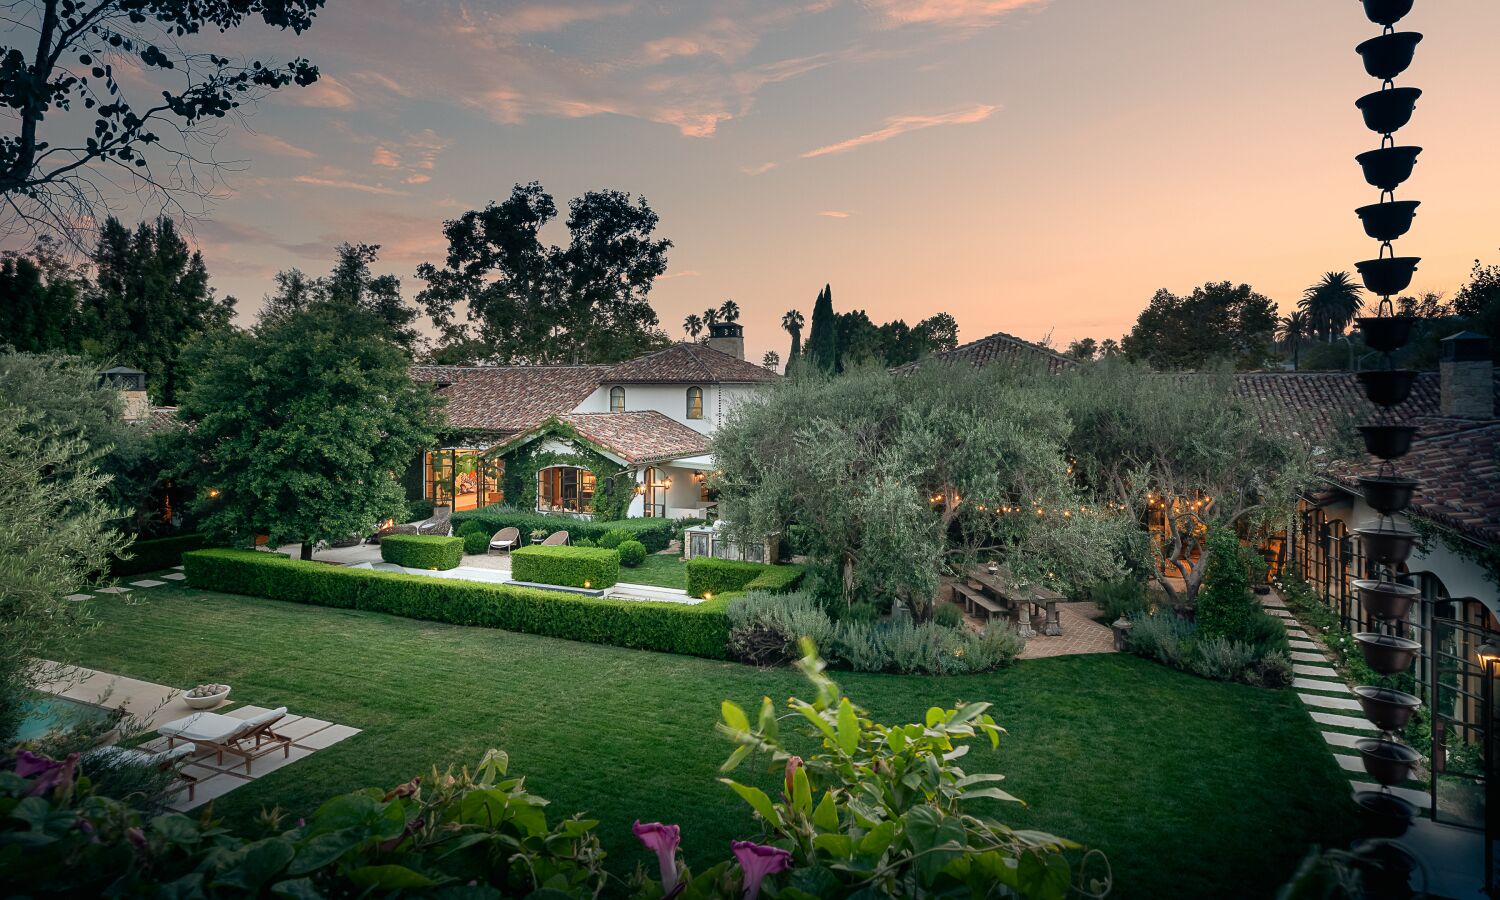 A designer’s custom compound sells for $16.55 million, a record